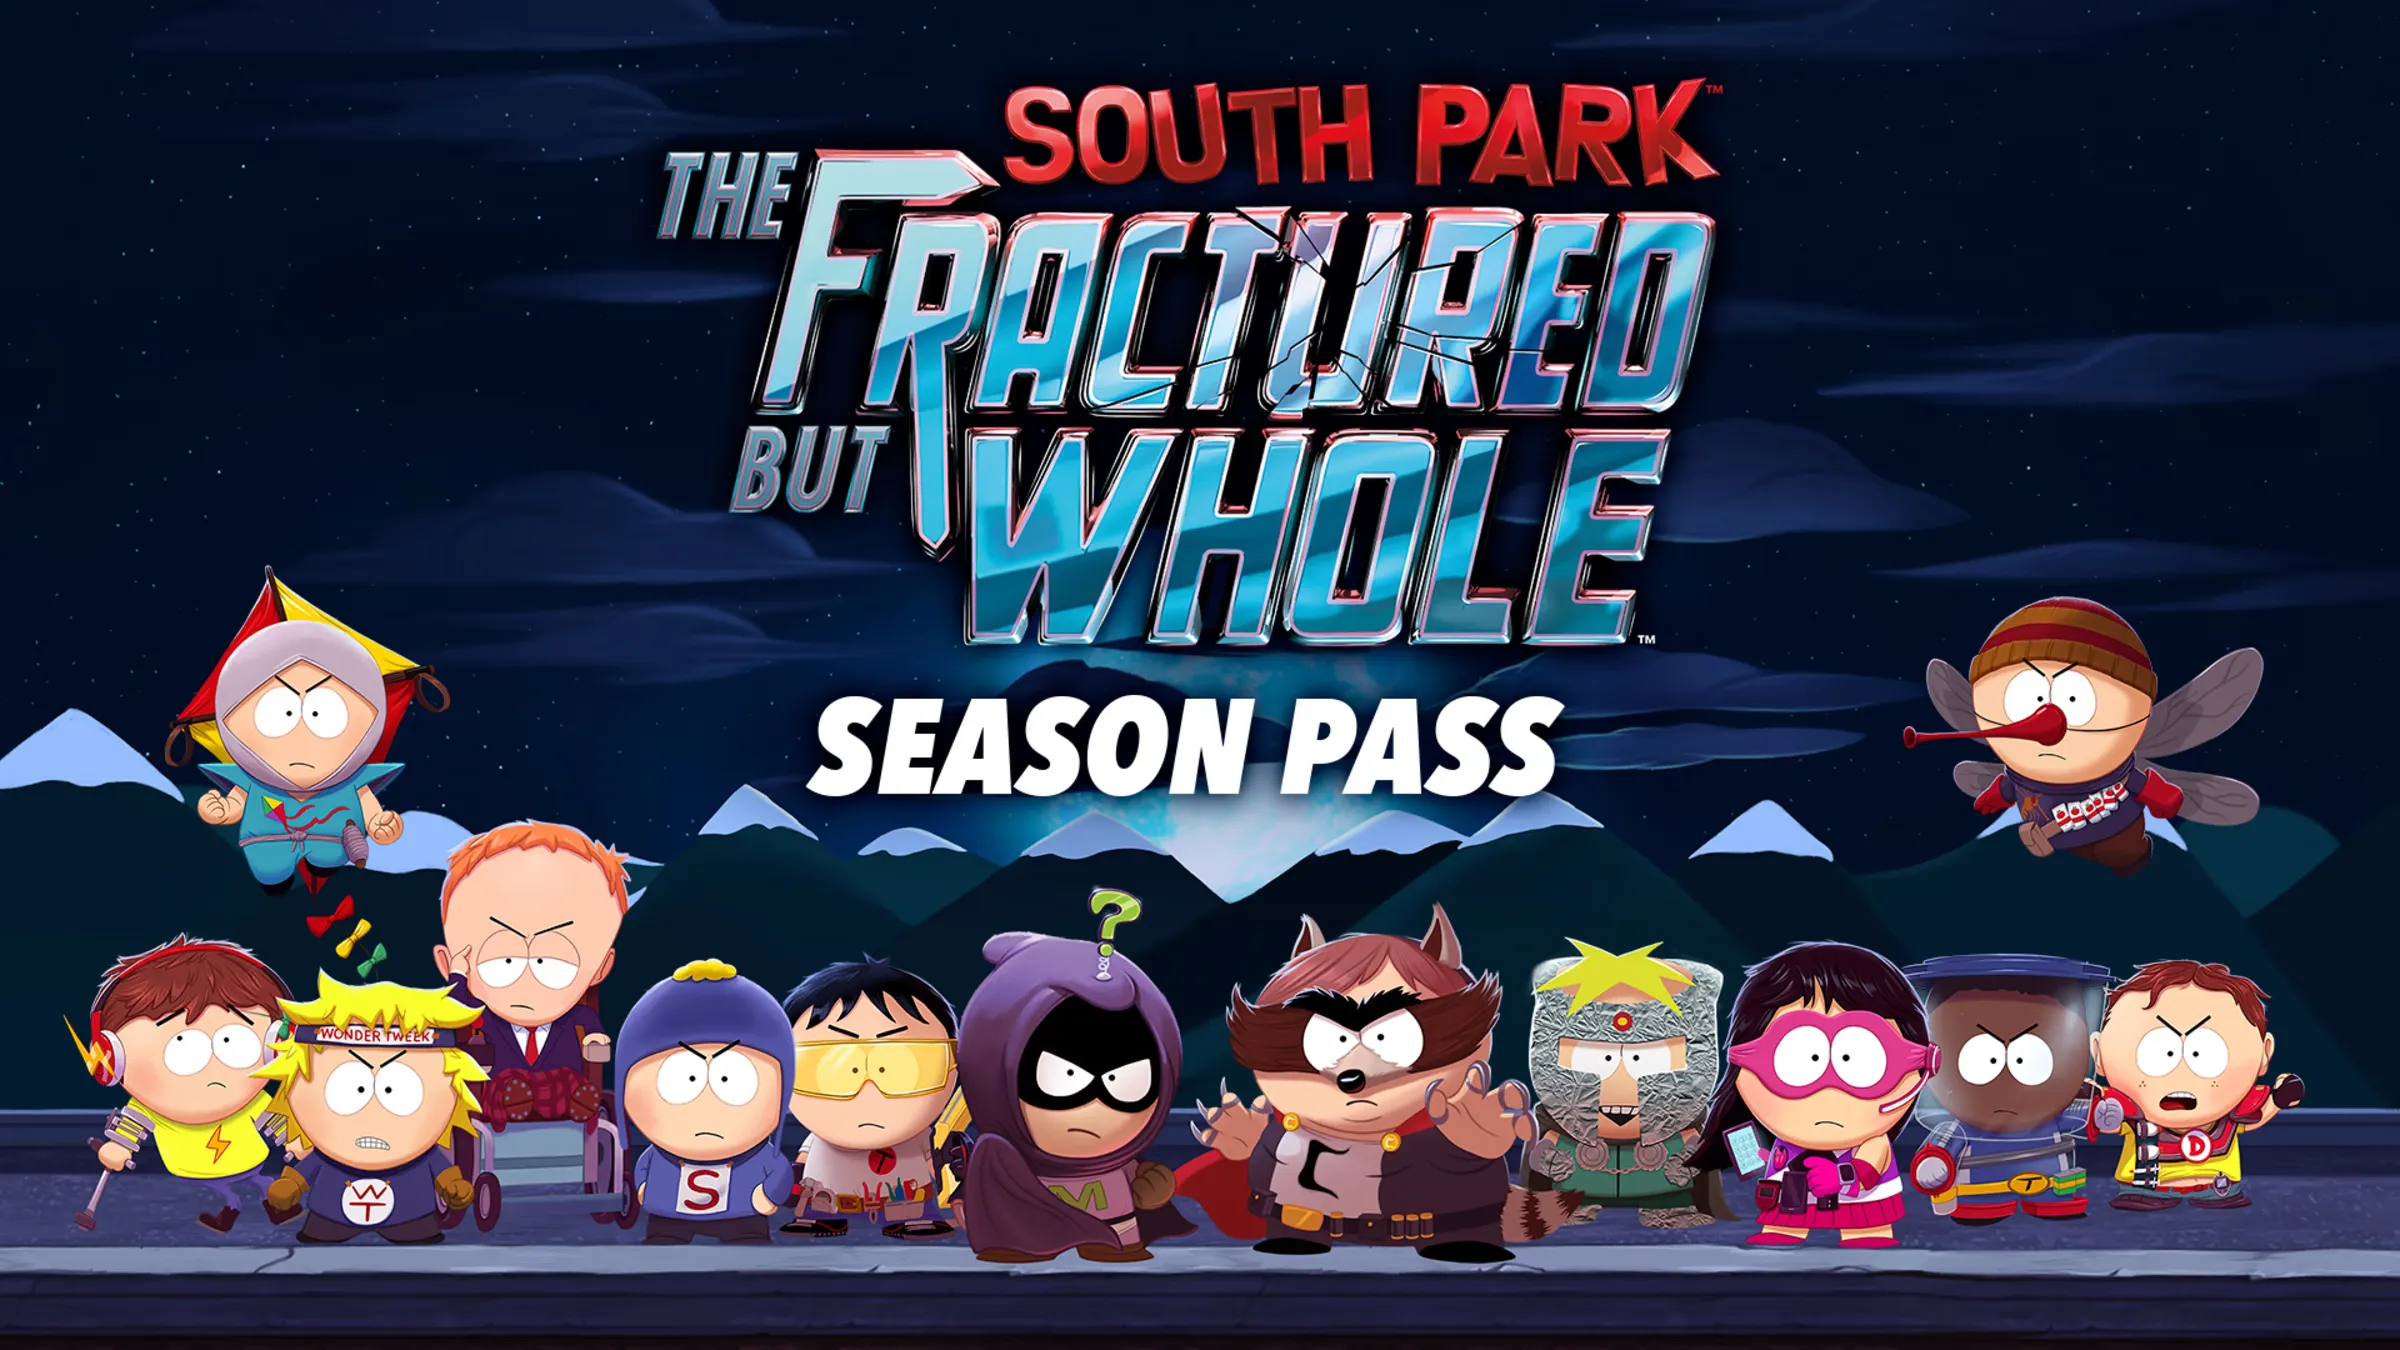 South park the fractured but whole купить ключ стим фото 95